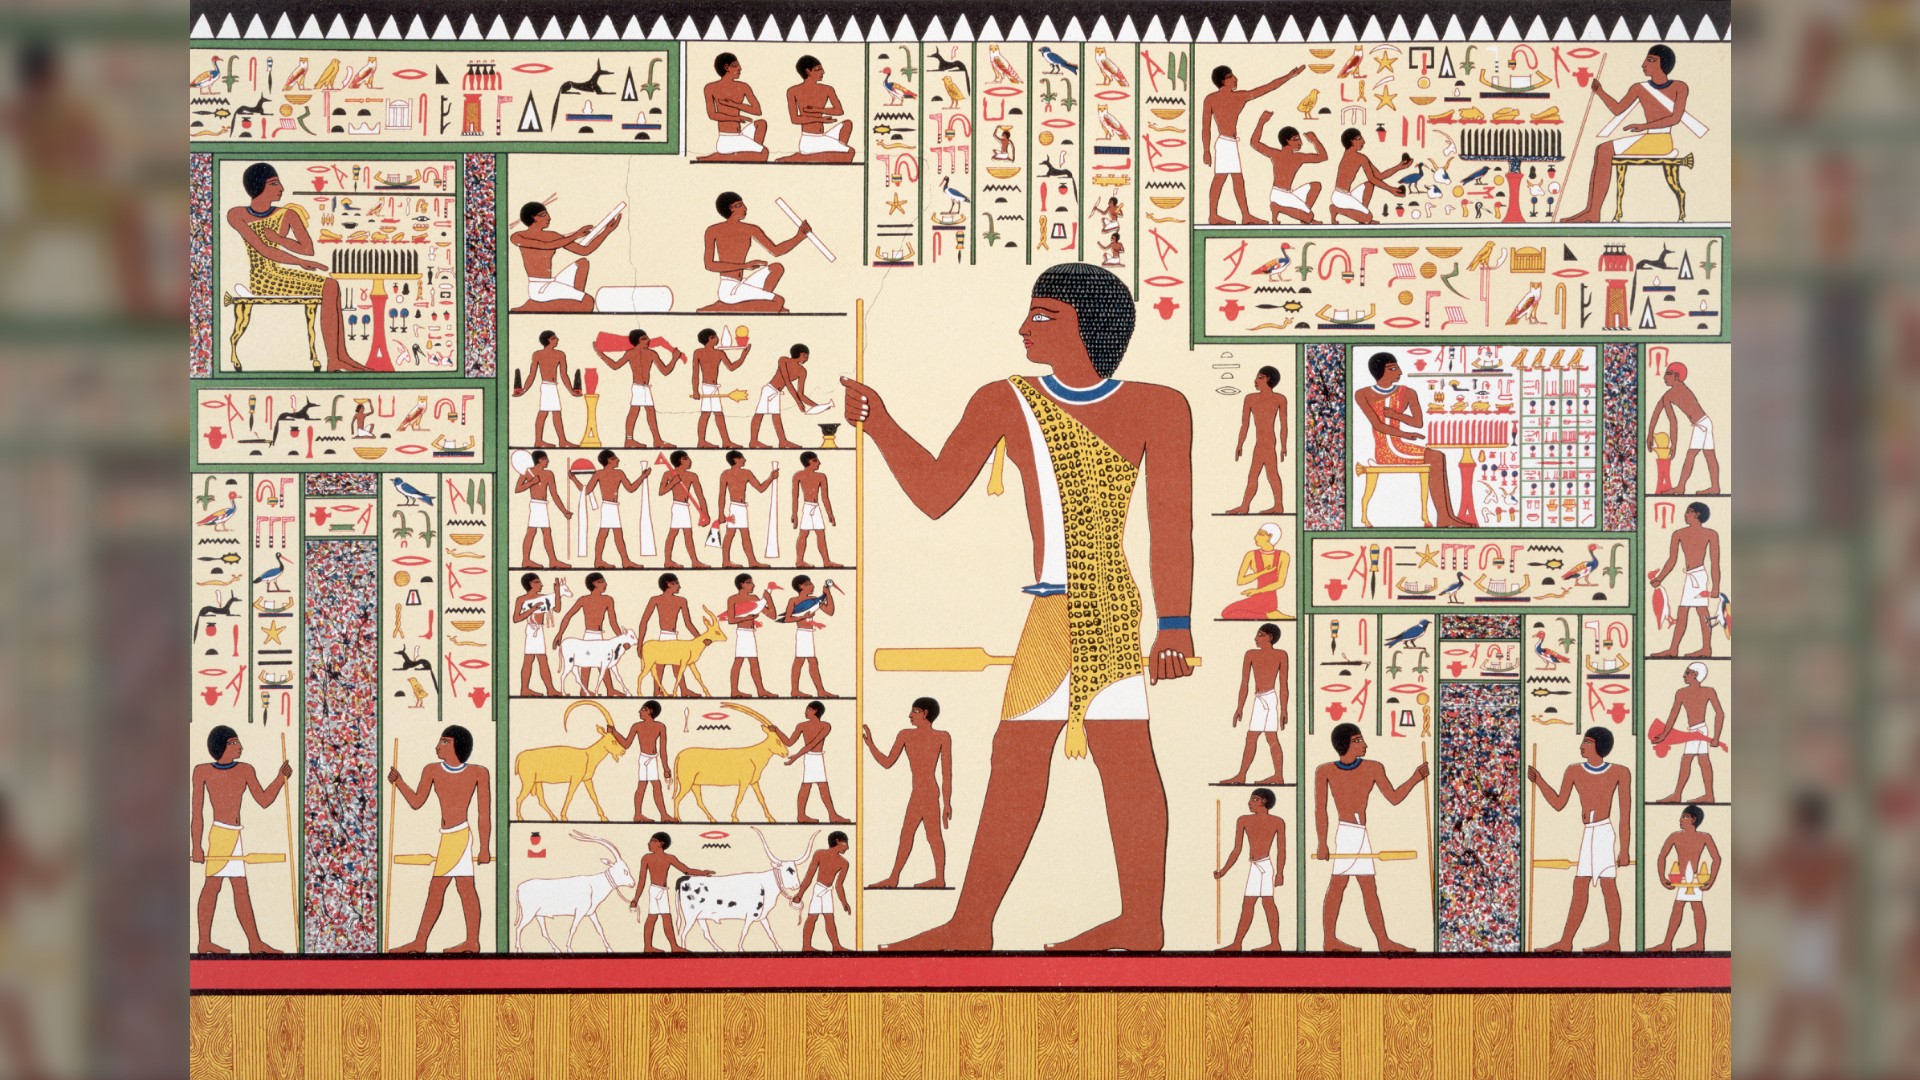 Wall Painting with Egyptian Hieroglyphics from Tomb 24, Giza. There are lots of images of people wearing wraparound white linen skirts doing various activities, such as herding cattle, carrying tools, scribing, and worshiping.